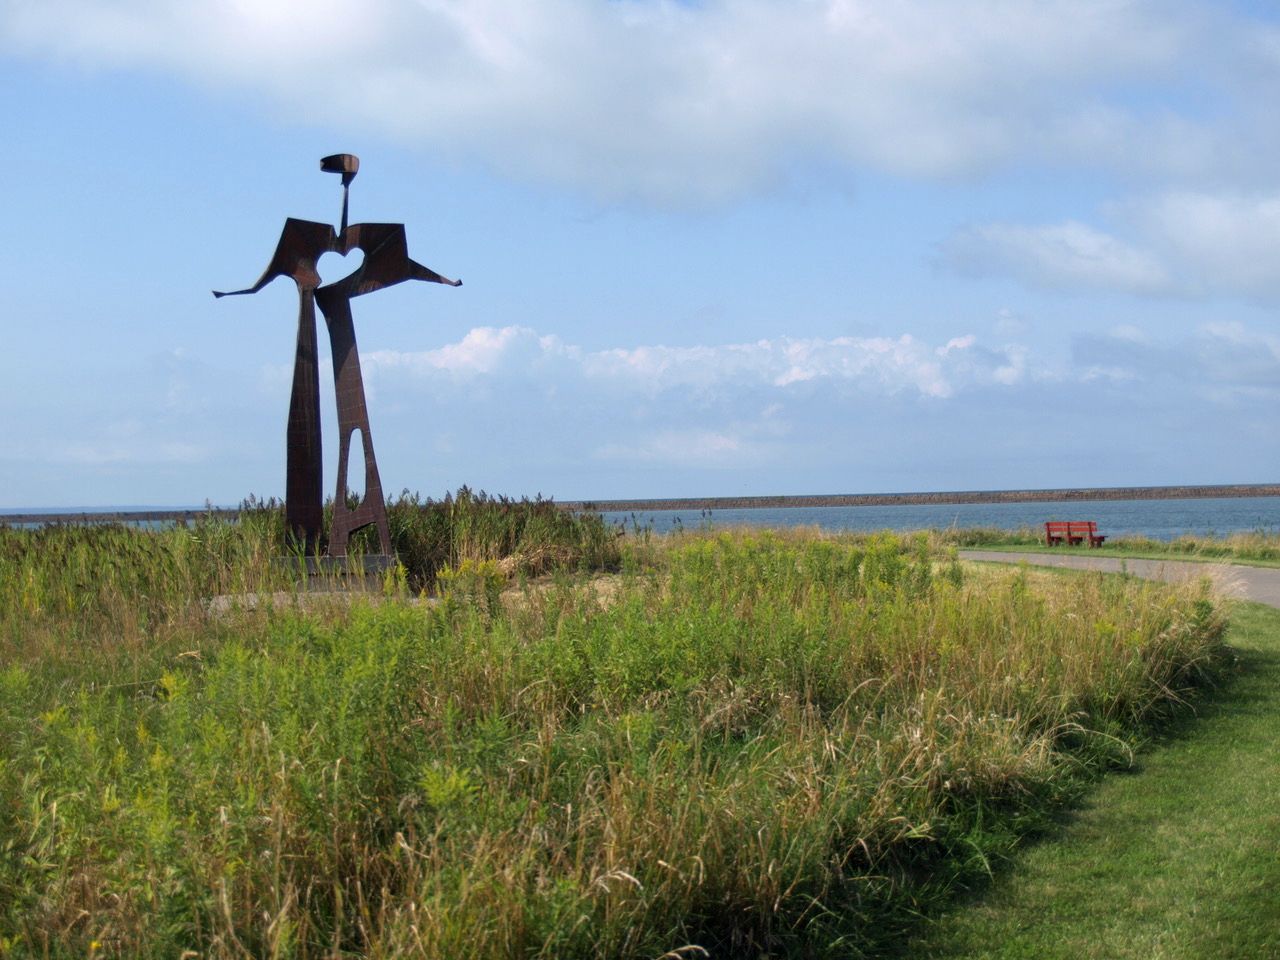 Video: Larry Griffis, Jr’s “Flat Man” sculpture moves to the Outer Harbor Buffalo